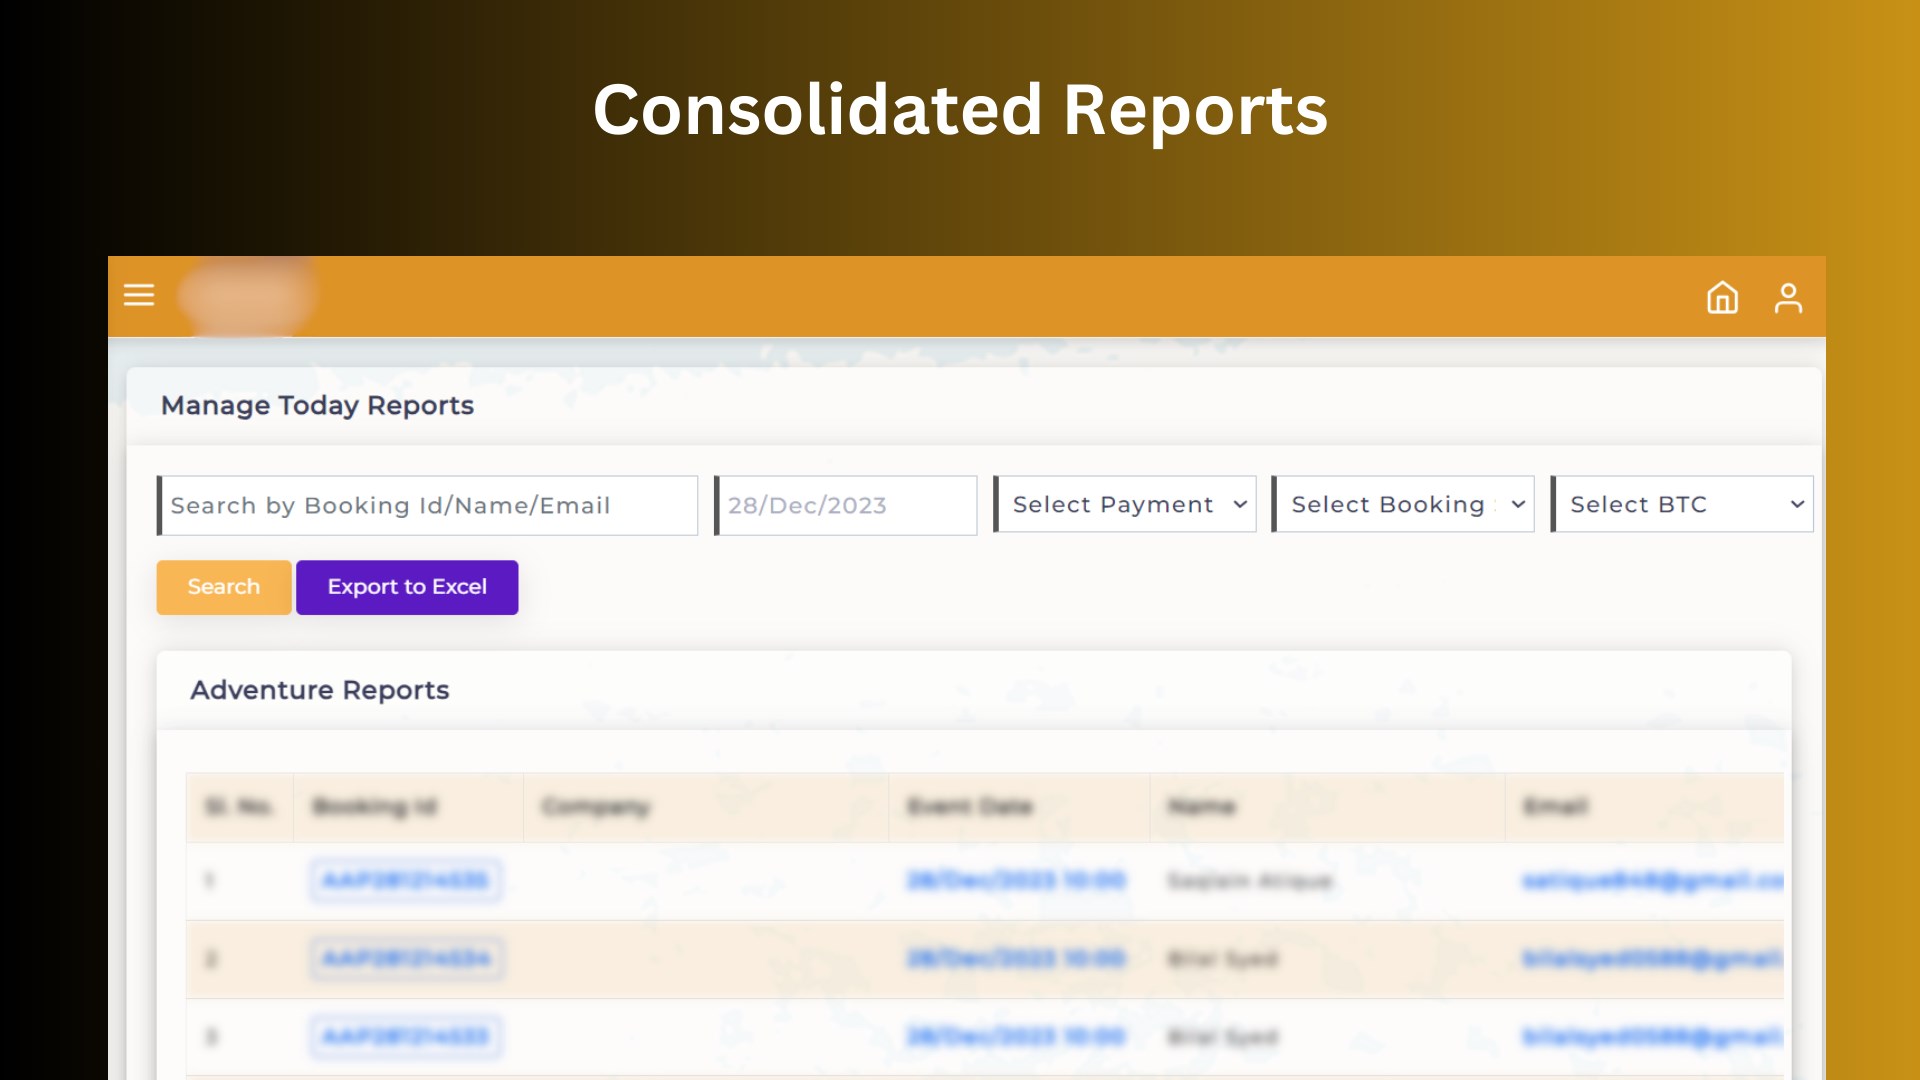 Consolidated reports feature enabling users to view all booking details in one comprehensive overview.